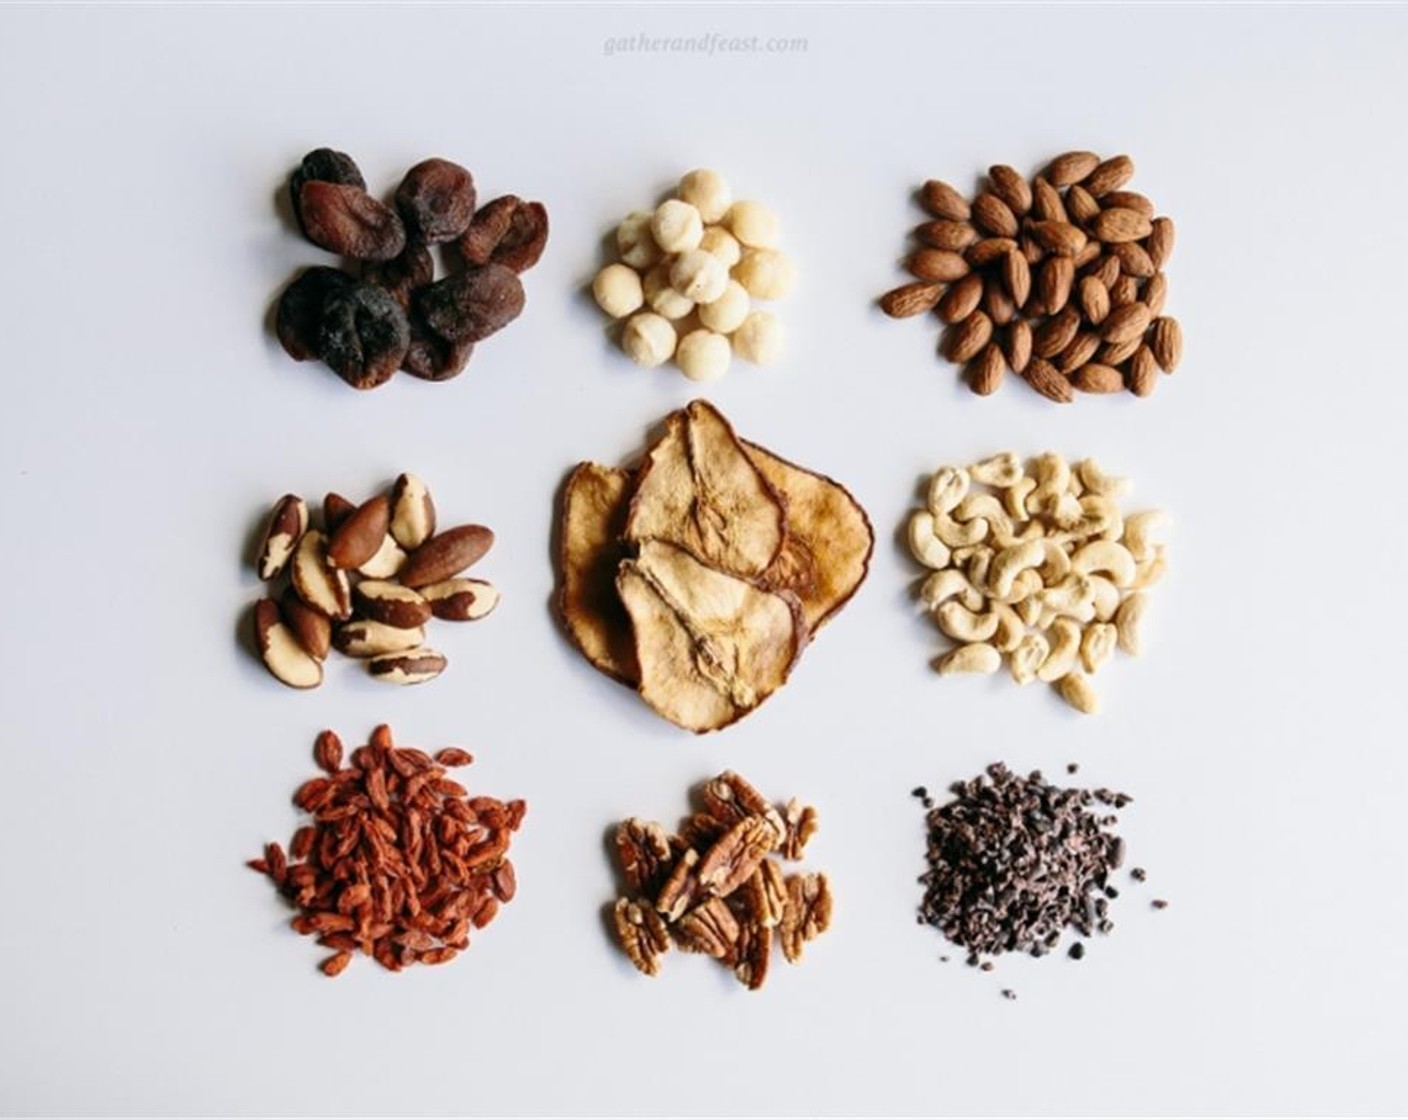 step 1 Mix together equal quantities of Dried Pears (1 handful) and Dried Turkish Apricots (1 handful). Add equal quantities of Roasted Almonds (1 handful), Raw Macadamia Nuts (1 handful), Raw Cashews (1 handful), Raw Brazil Nuts (1 handful), and Pecans (1 handful).